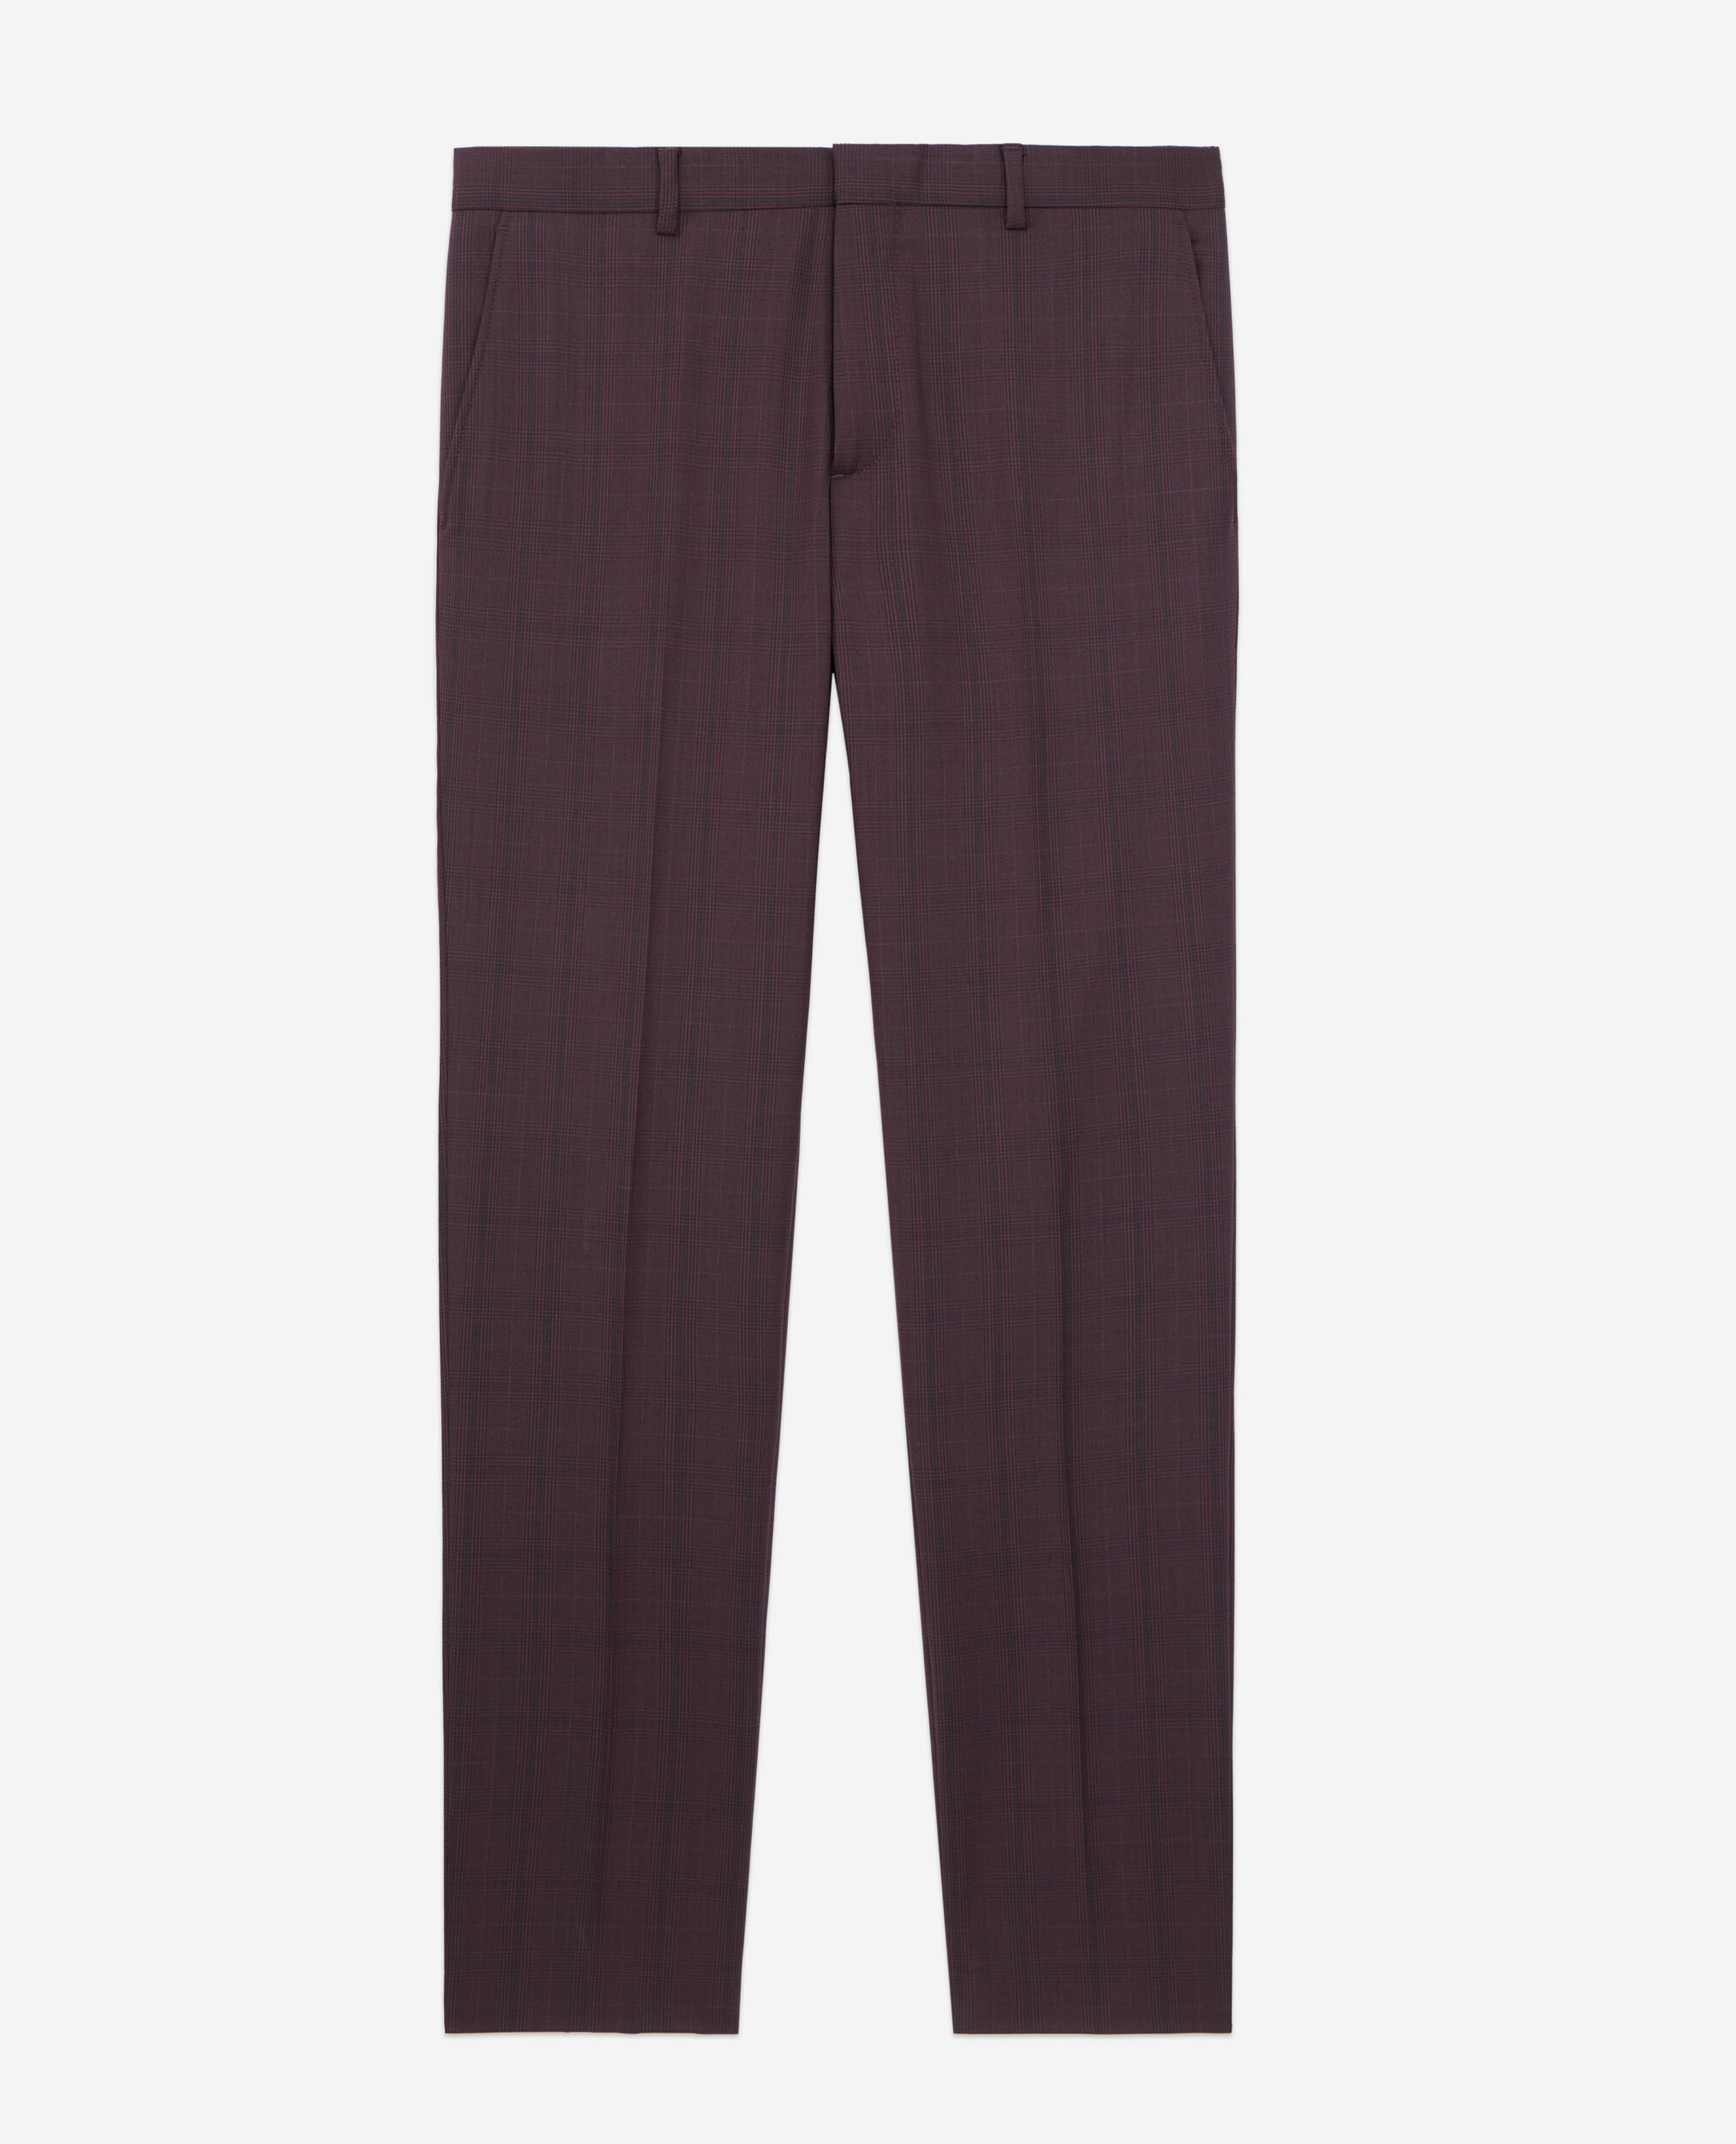 Burgundy checked wool suit trousers, BORDEAUX, hi-res image number null